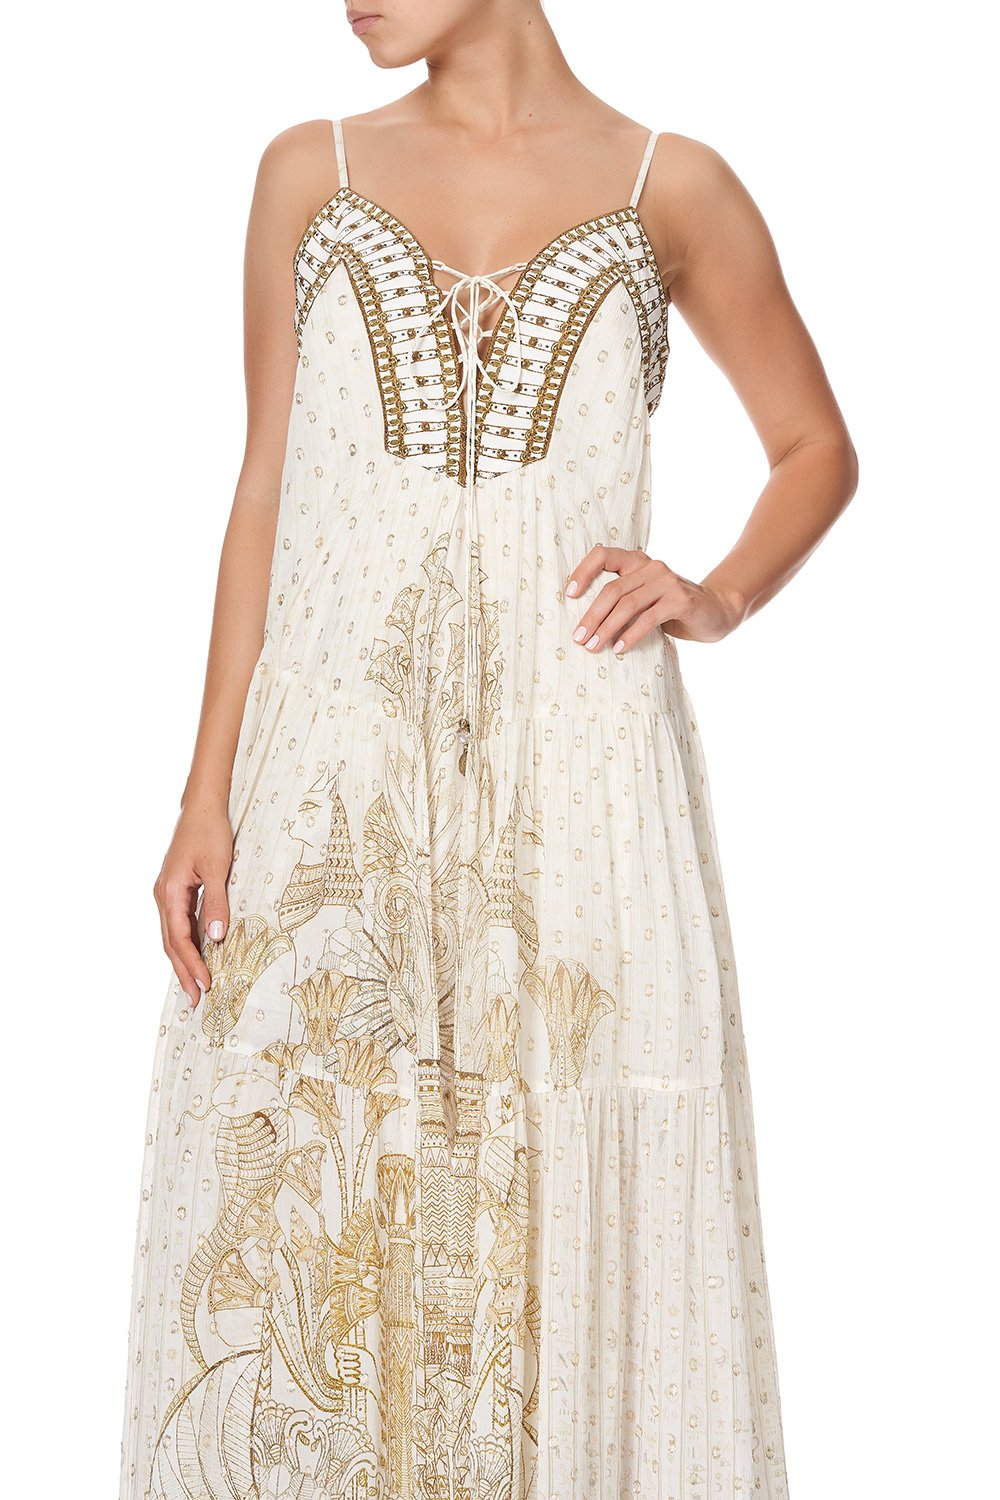 LACE UP FRONT PANEL DRESS THE QUEENS CHAMBER